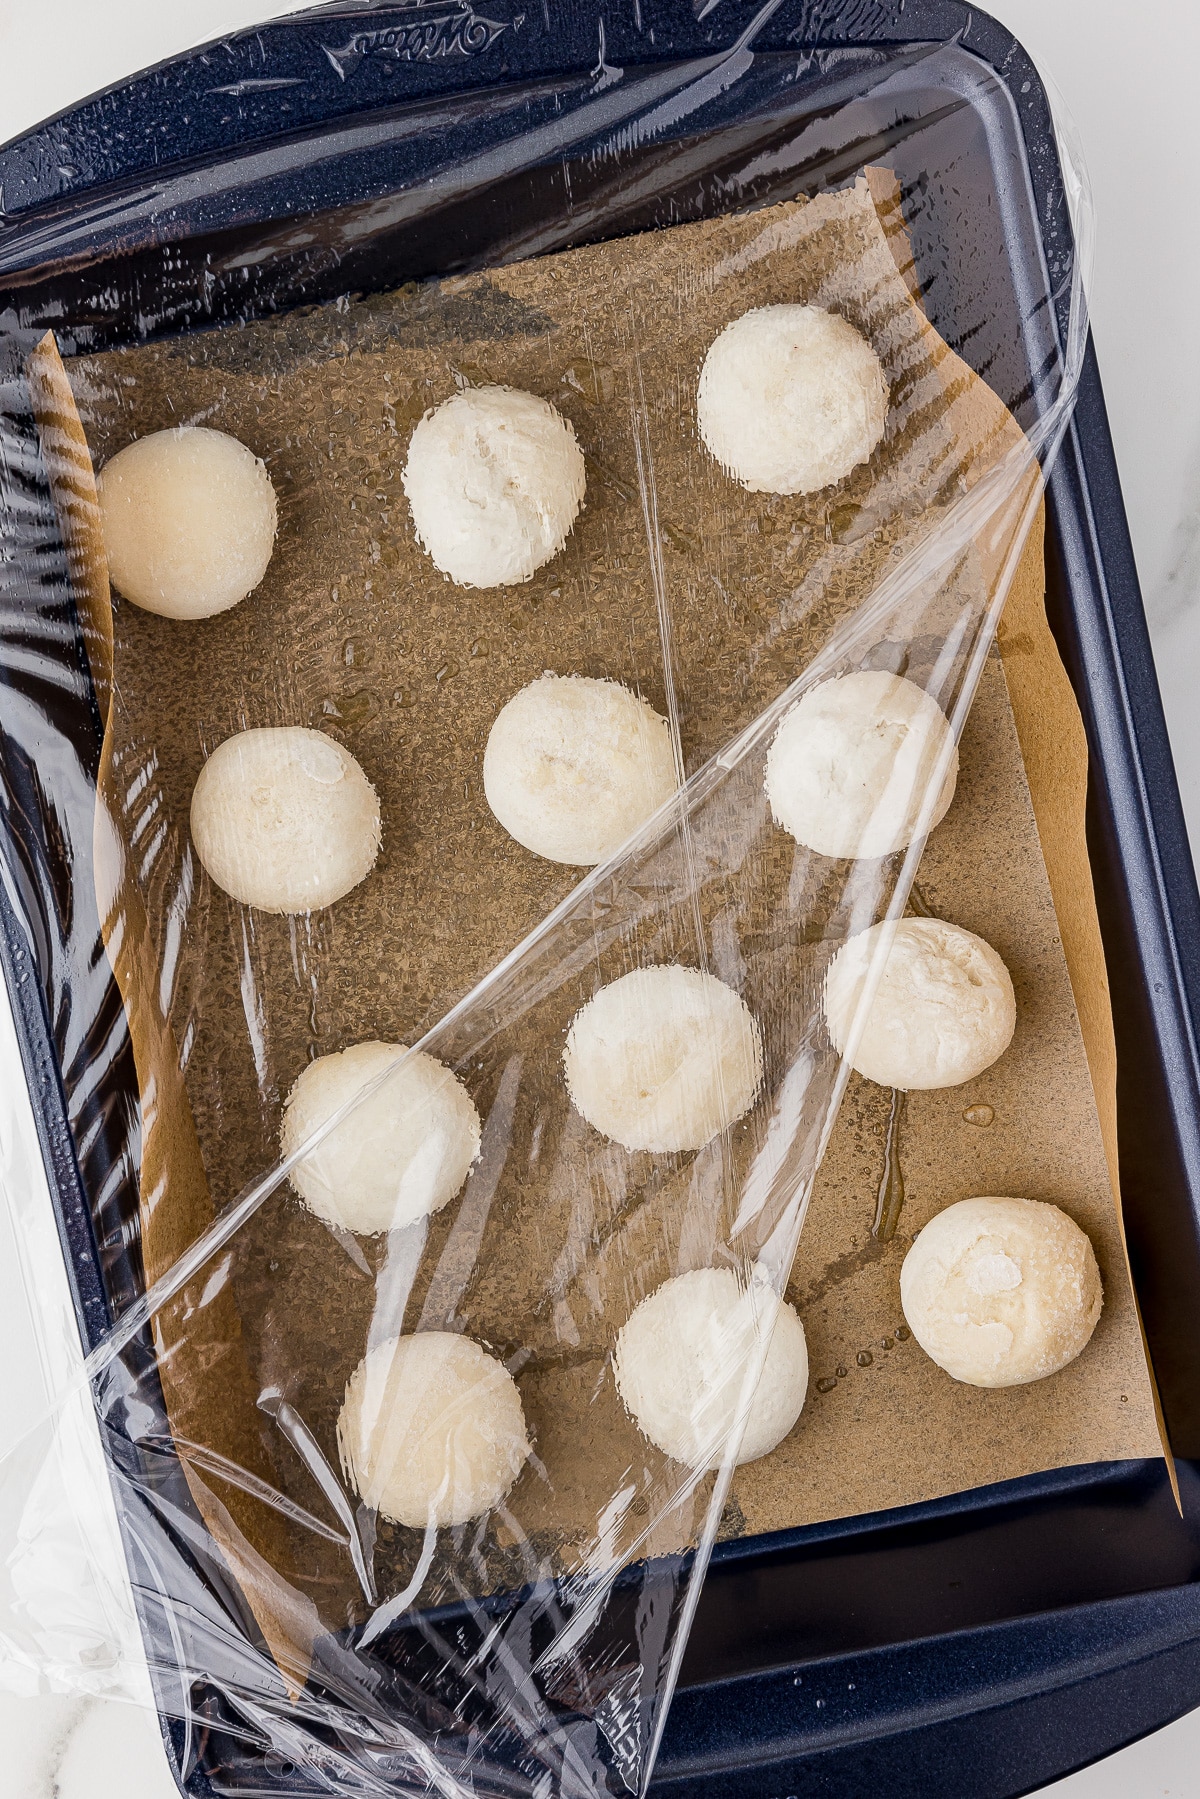 12 frozen Rhodes dinner rolls in a 9x13 Wilton cake pan, rolls are on parchment paper and are partially covered in plastic wrap